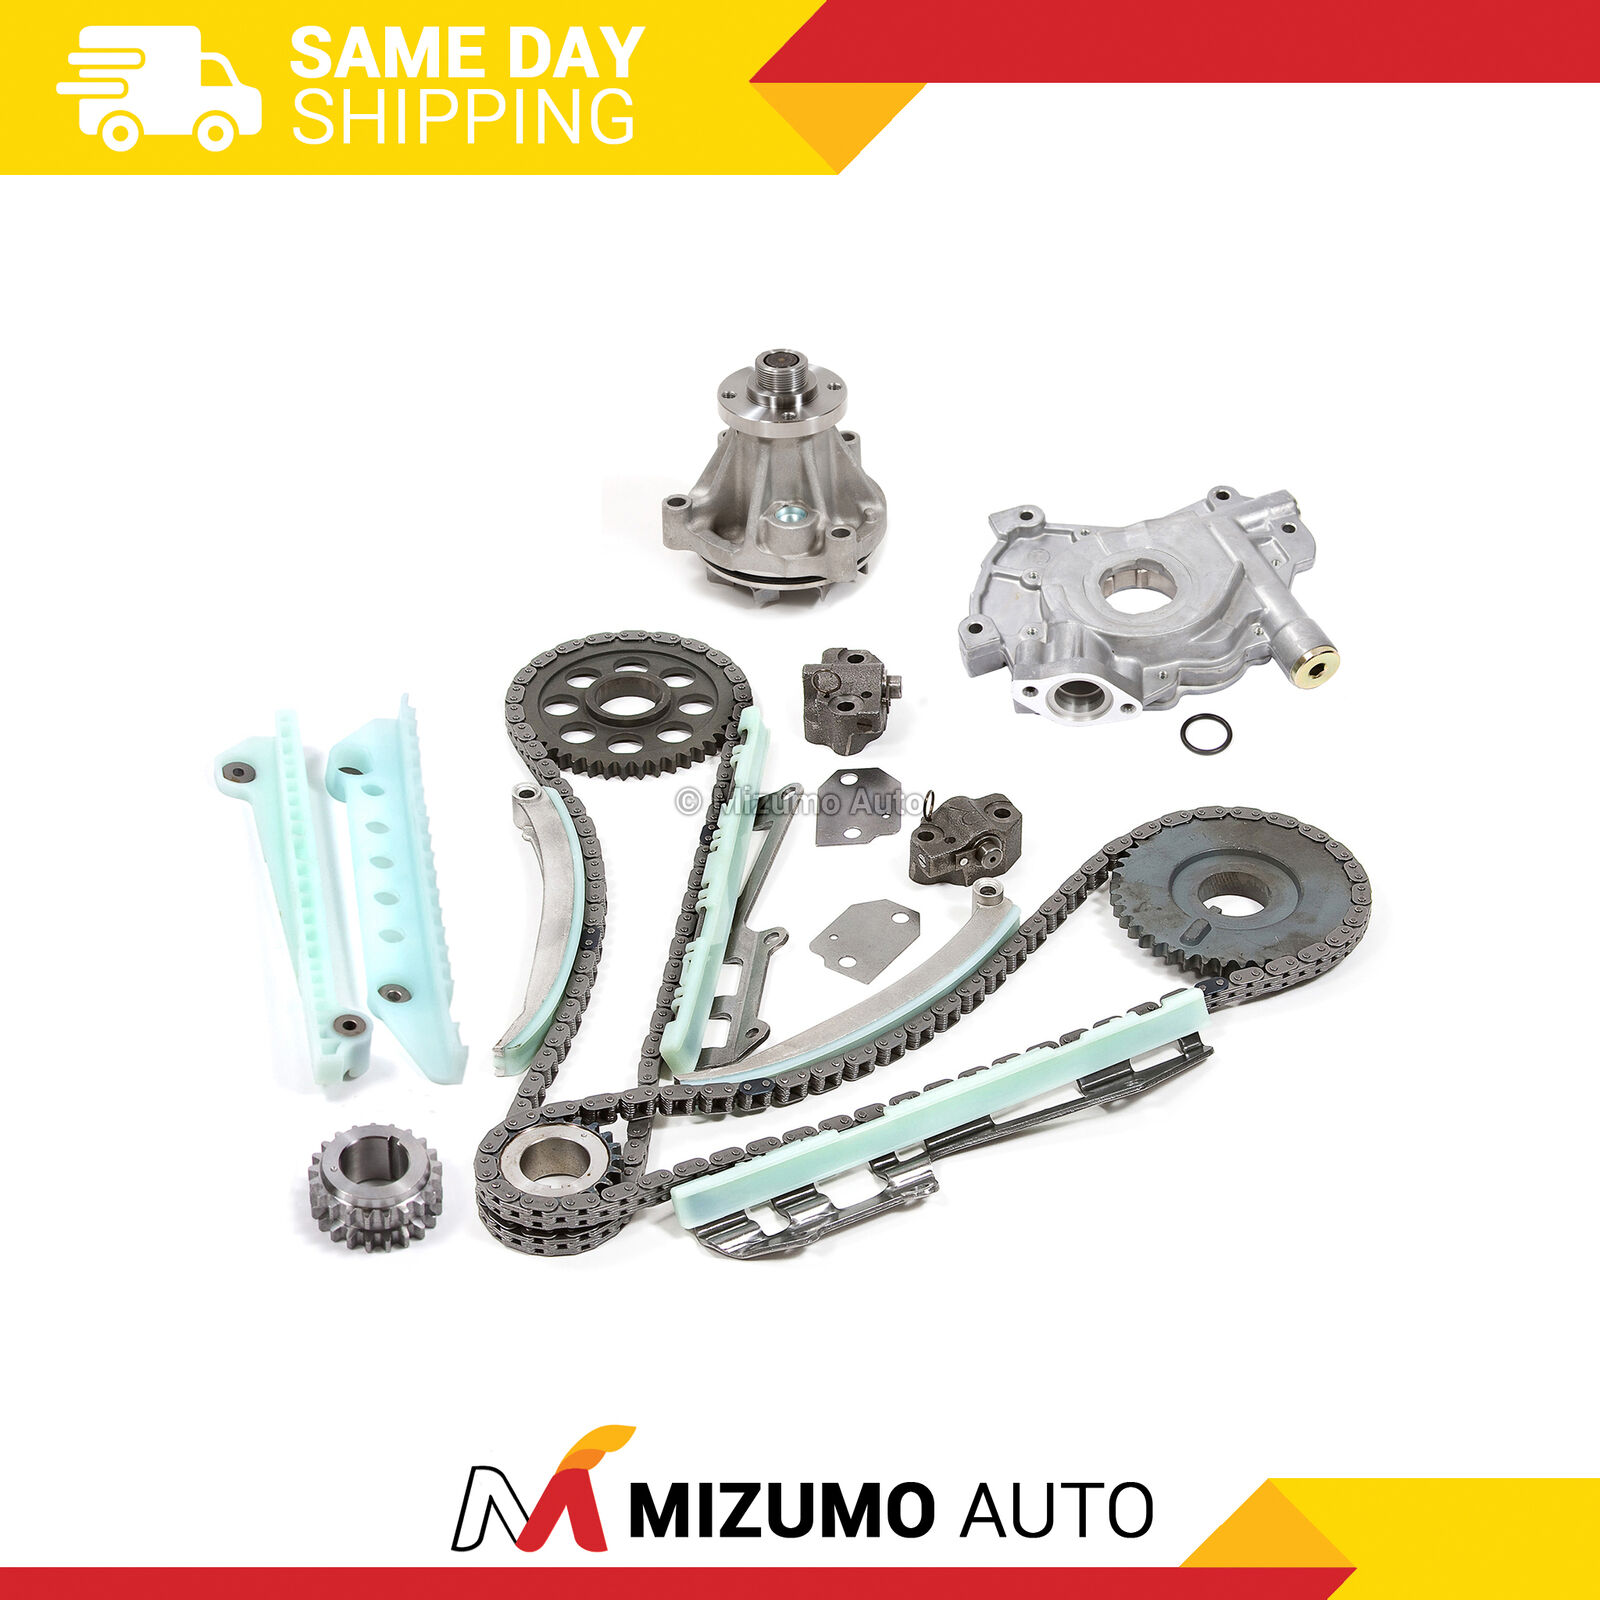 Timing Chain Kit Oil Pump Water Pump Fit 97-02 Ford F-150 Lincoln Mercury 4.6